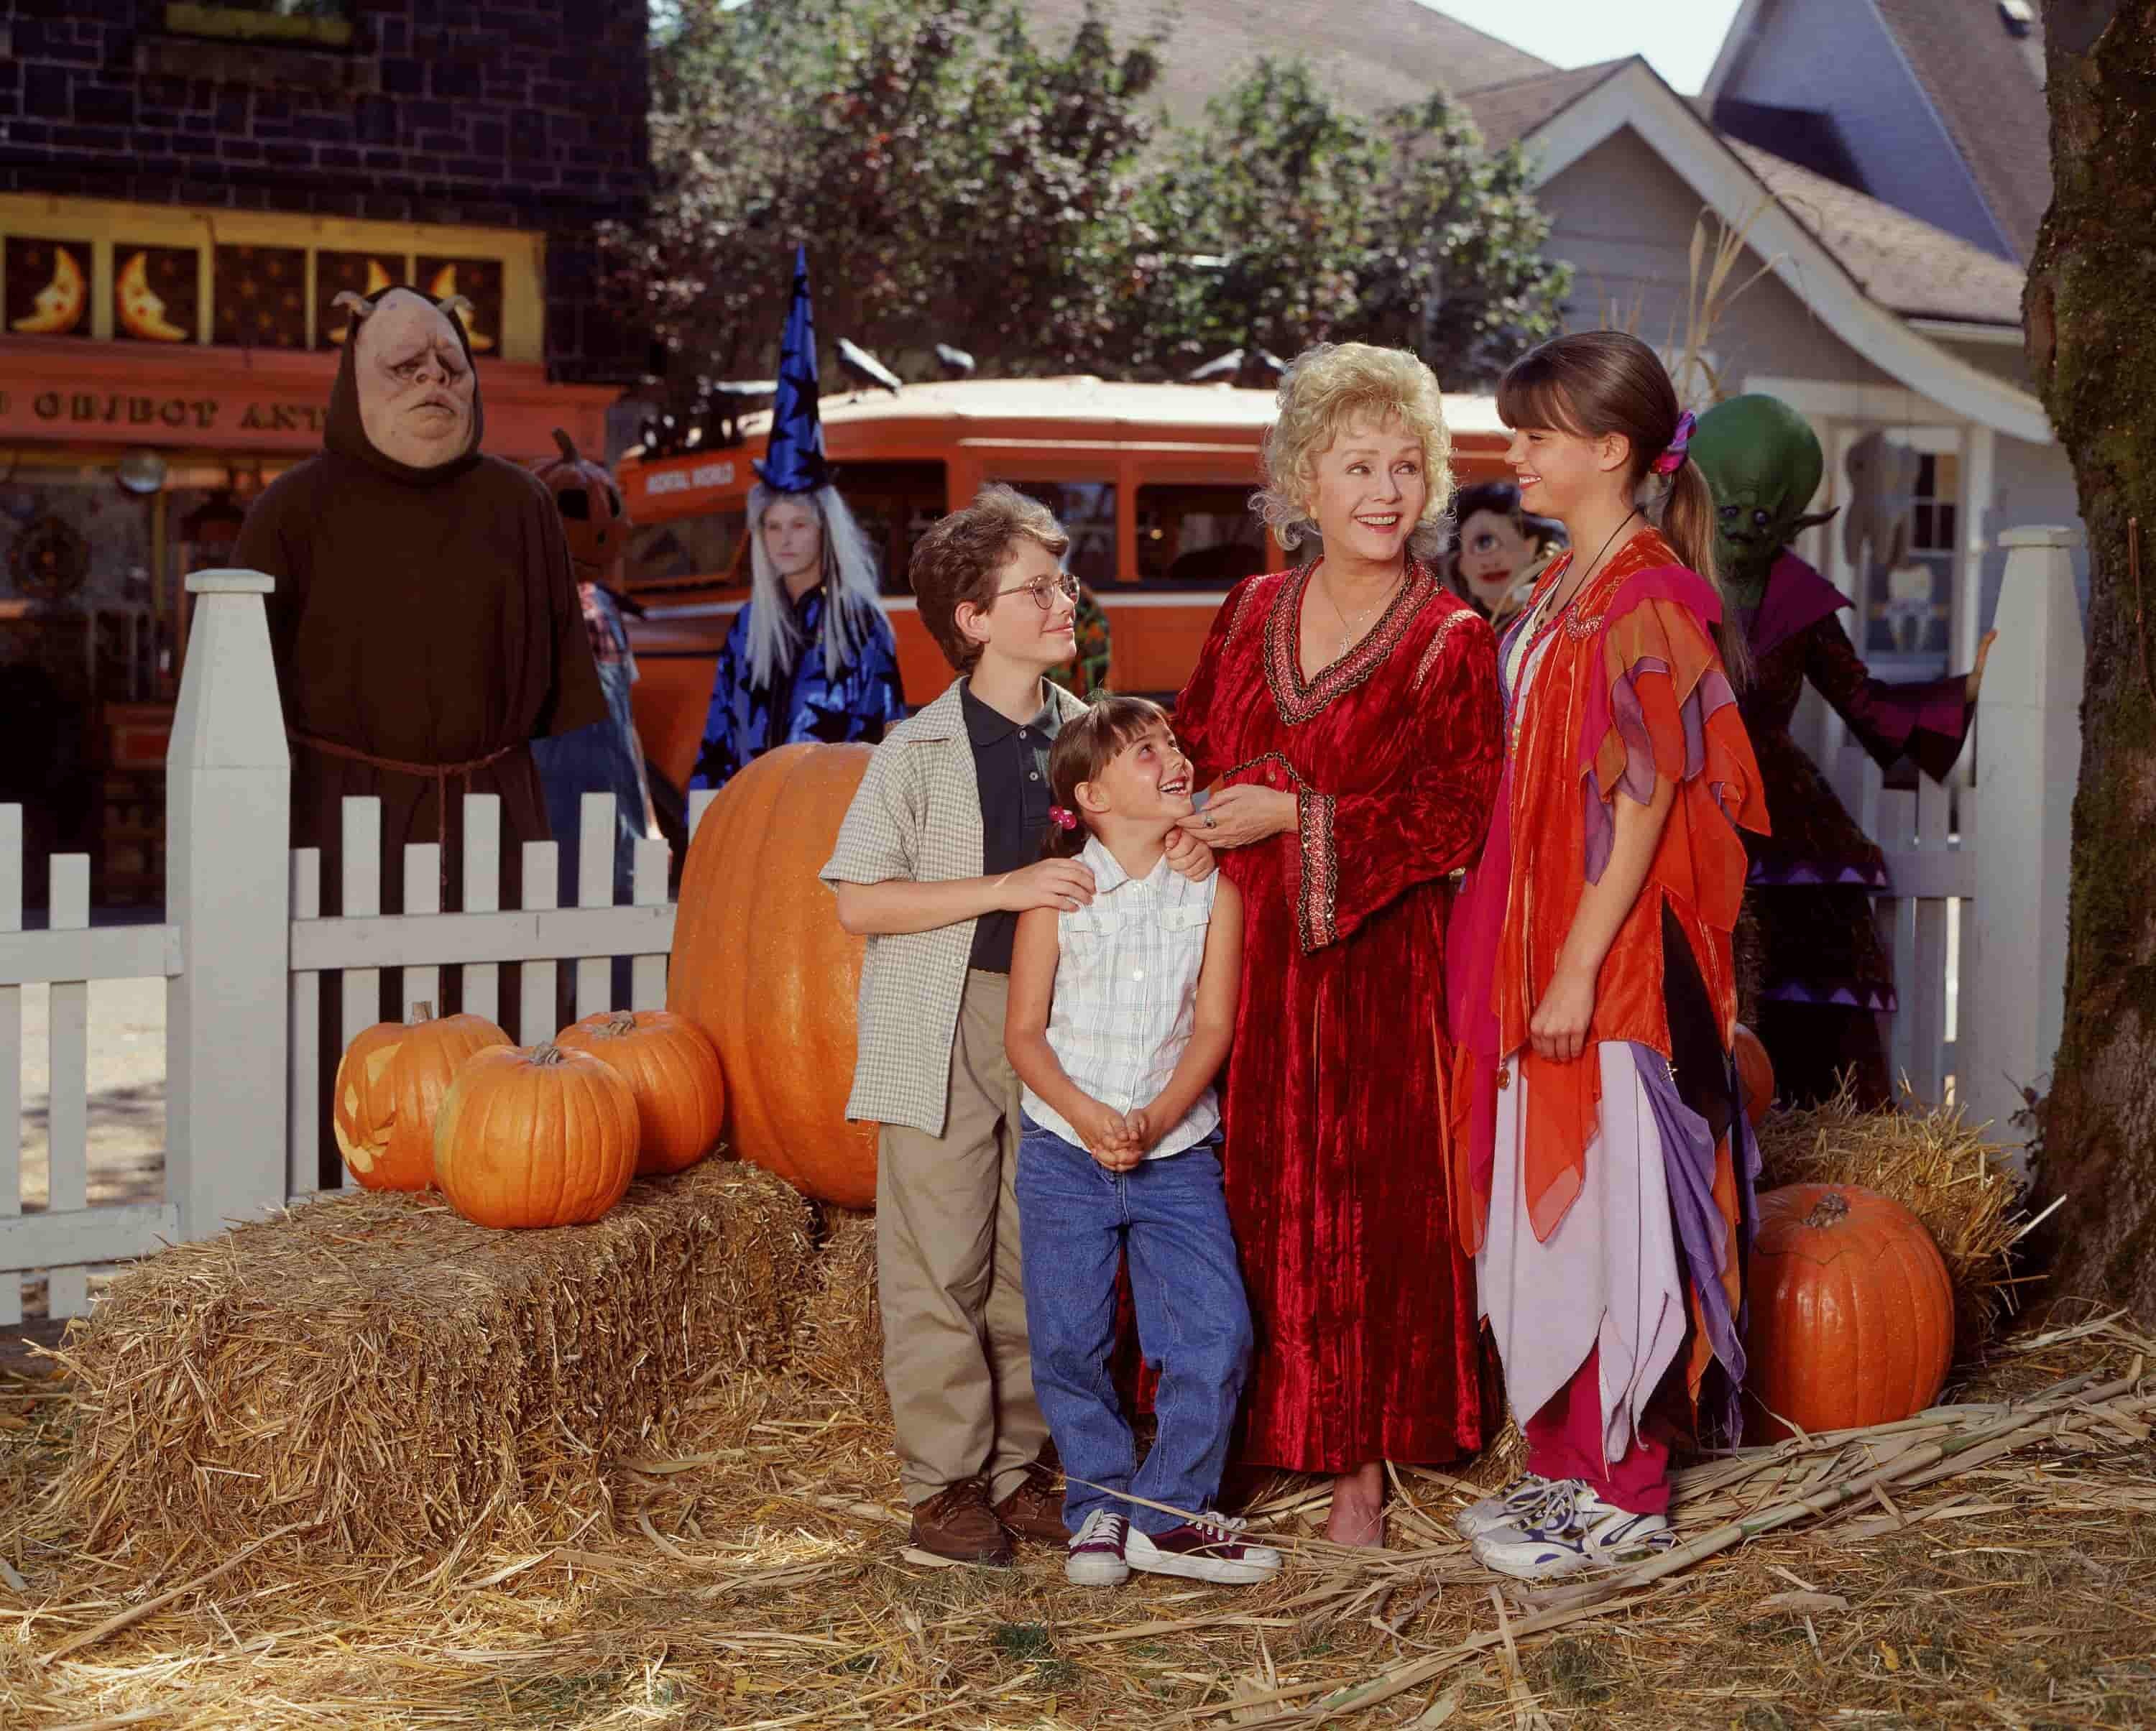 the family from the movie HalloweenTown